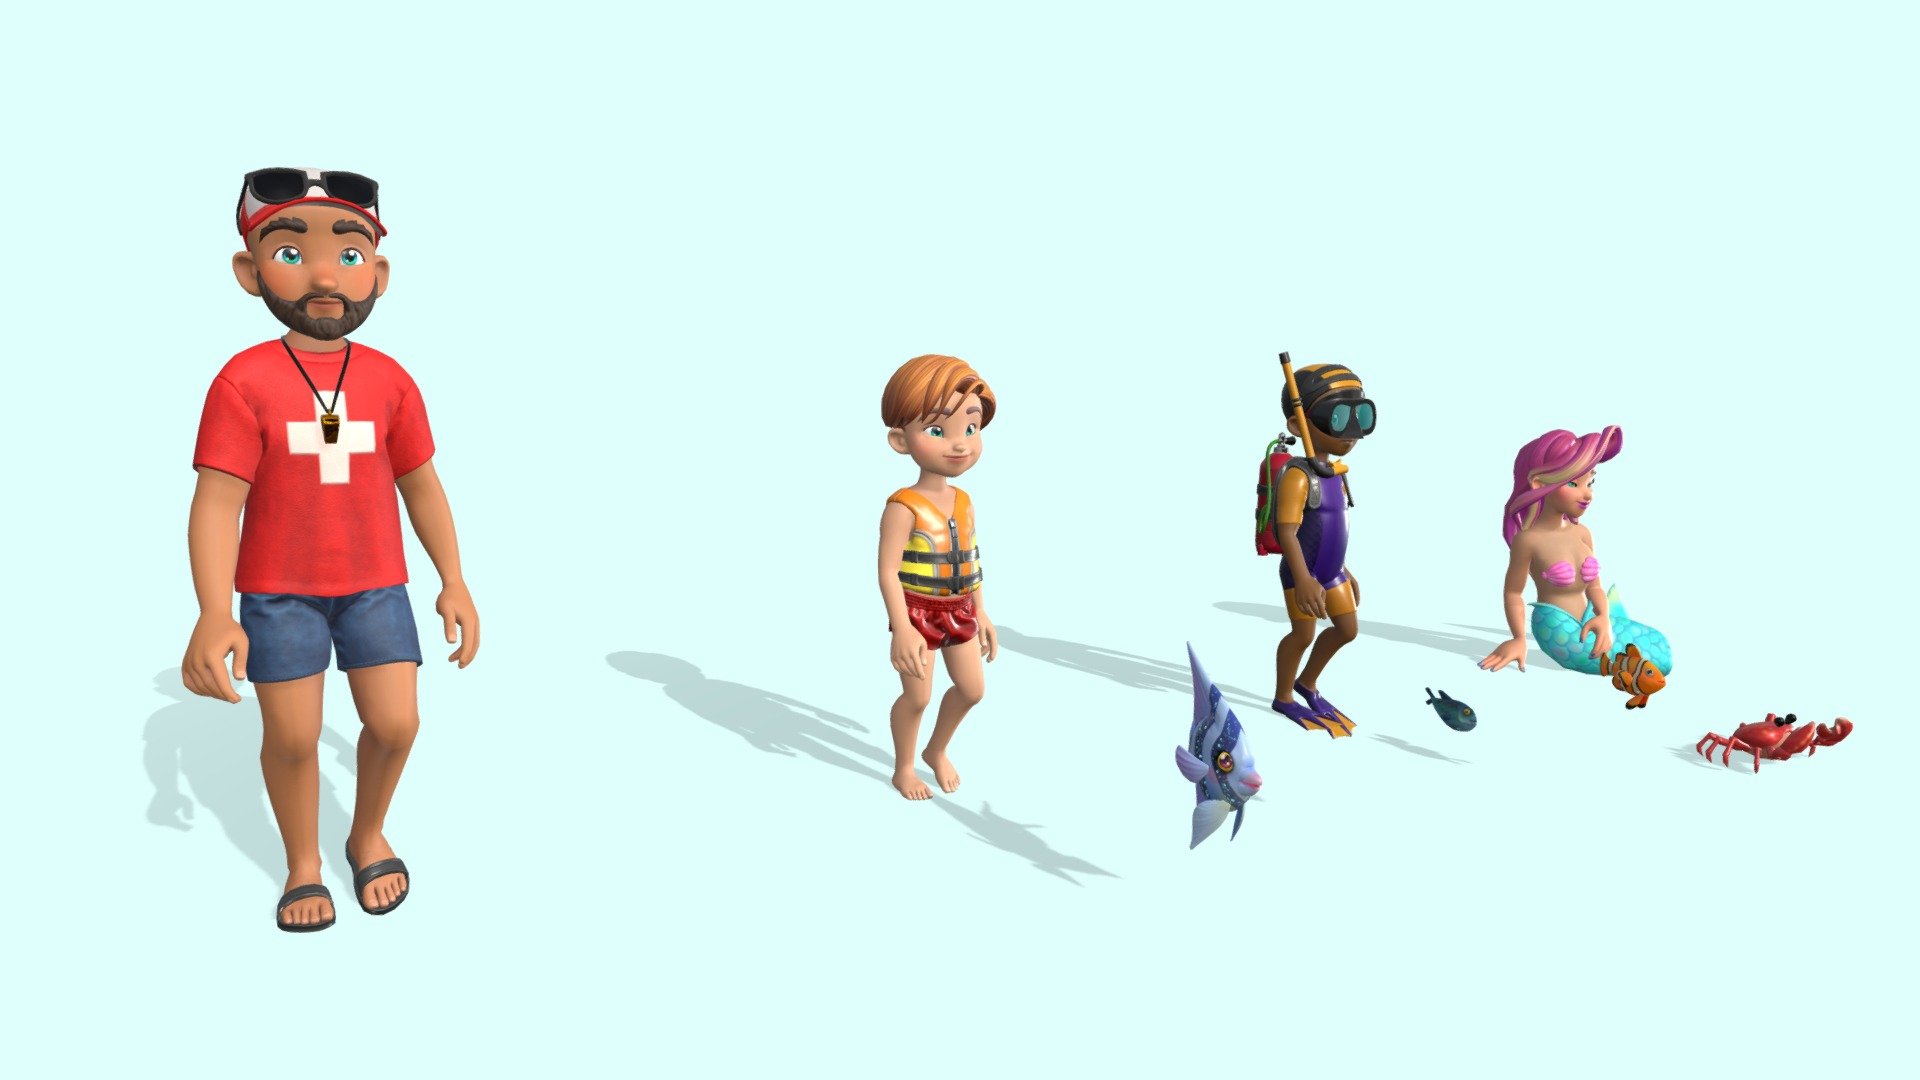 Characters pack and animals pack from the KEKOS Tropical Beach package.

Ready to import in your preferred videogame engine or 3D software.

The package include the following models: Lifeguard, beach boy, diver, siren, 3 fishes and 1 crab.

FORMAT:

FBX

POLYGON COUNT:

Character: ~20k Triangles

Animals: ~2.5k Triangles

TEXTURES:

THE SIREN INCLUDES TWO DIFFERENT SKIN AND HAIR COLORS (Hair blue and pink, two skin tones).

THE CRAB INCLUDES TWO DIFFERENT COLORS (Red and Golden).

PBR Textures: Diffuse + Normal map + Metallic (R) / Smoothness (A) / Ambient Oclussion (G) + Emissive (for one fish)

Size: 2048x2048 for most of the assets. A few 4096x4096 for detailed parts.

PNG format

RIG:




Full human rig for characters.

27 blendshapes for face expresions for characters.

Simple rig for fishes and crab.

ANIMATIONS:

Characters (except Siren):




Idle

Walk

Run

Jump

All Characters:




Floating

Sit

Animals:




Move
 - Kekos Tropical Beach - Characters and animals - Buy Royalty Free 3D model by Mameshiba Games (@MameshibaGames) 3d model